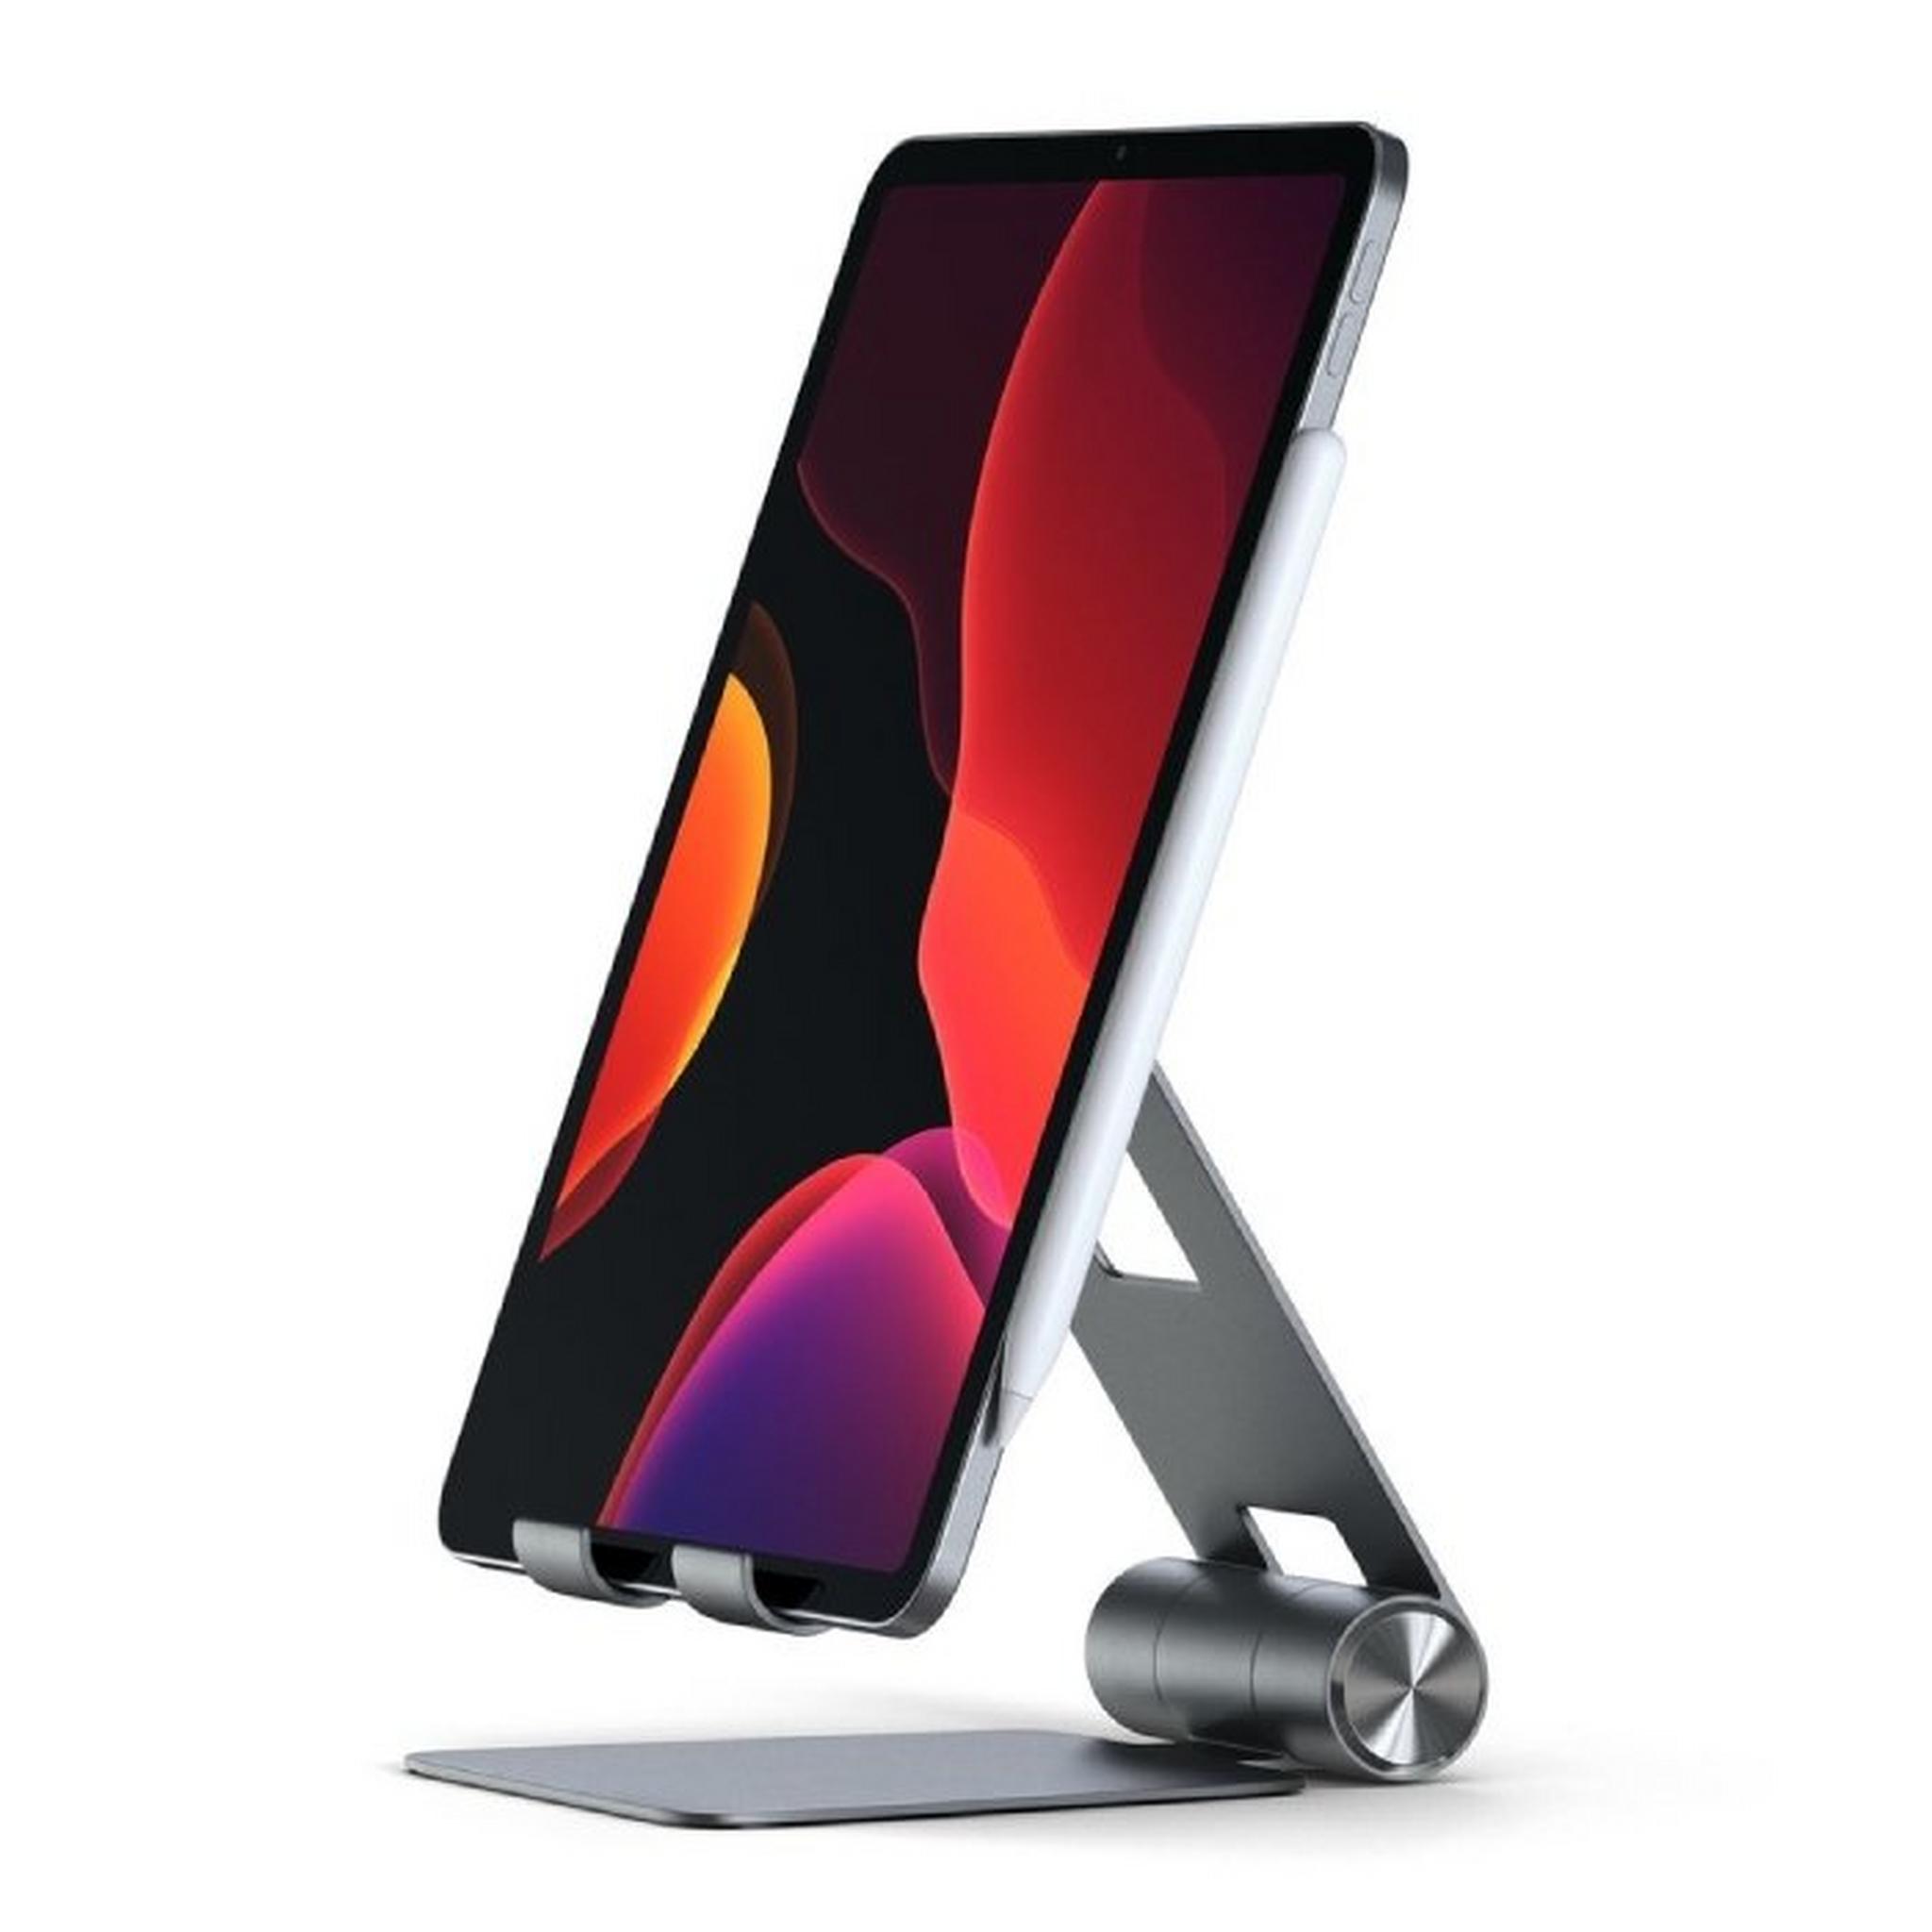 Satechi R1 Adjustable Mobile Stand - Space Gray